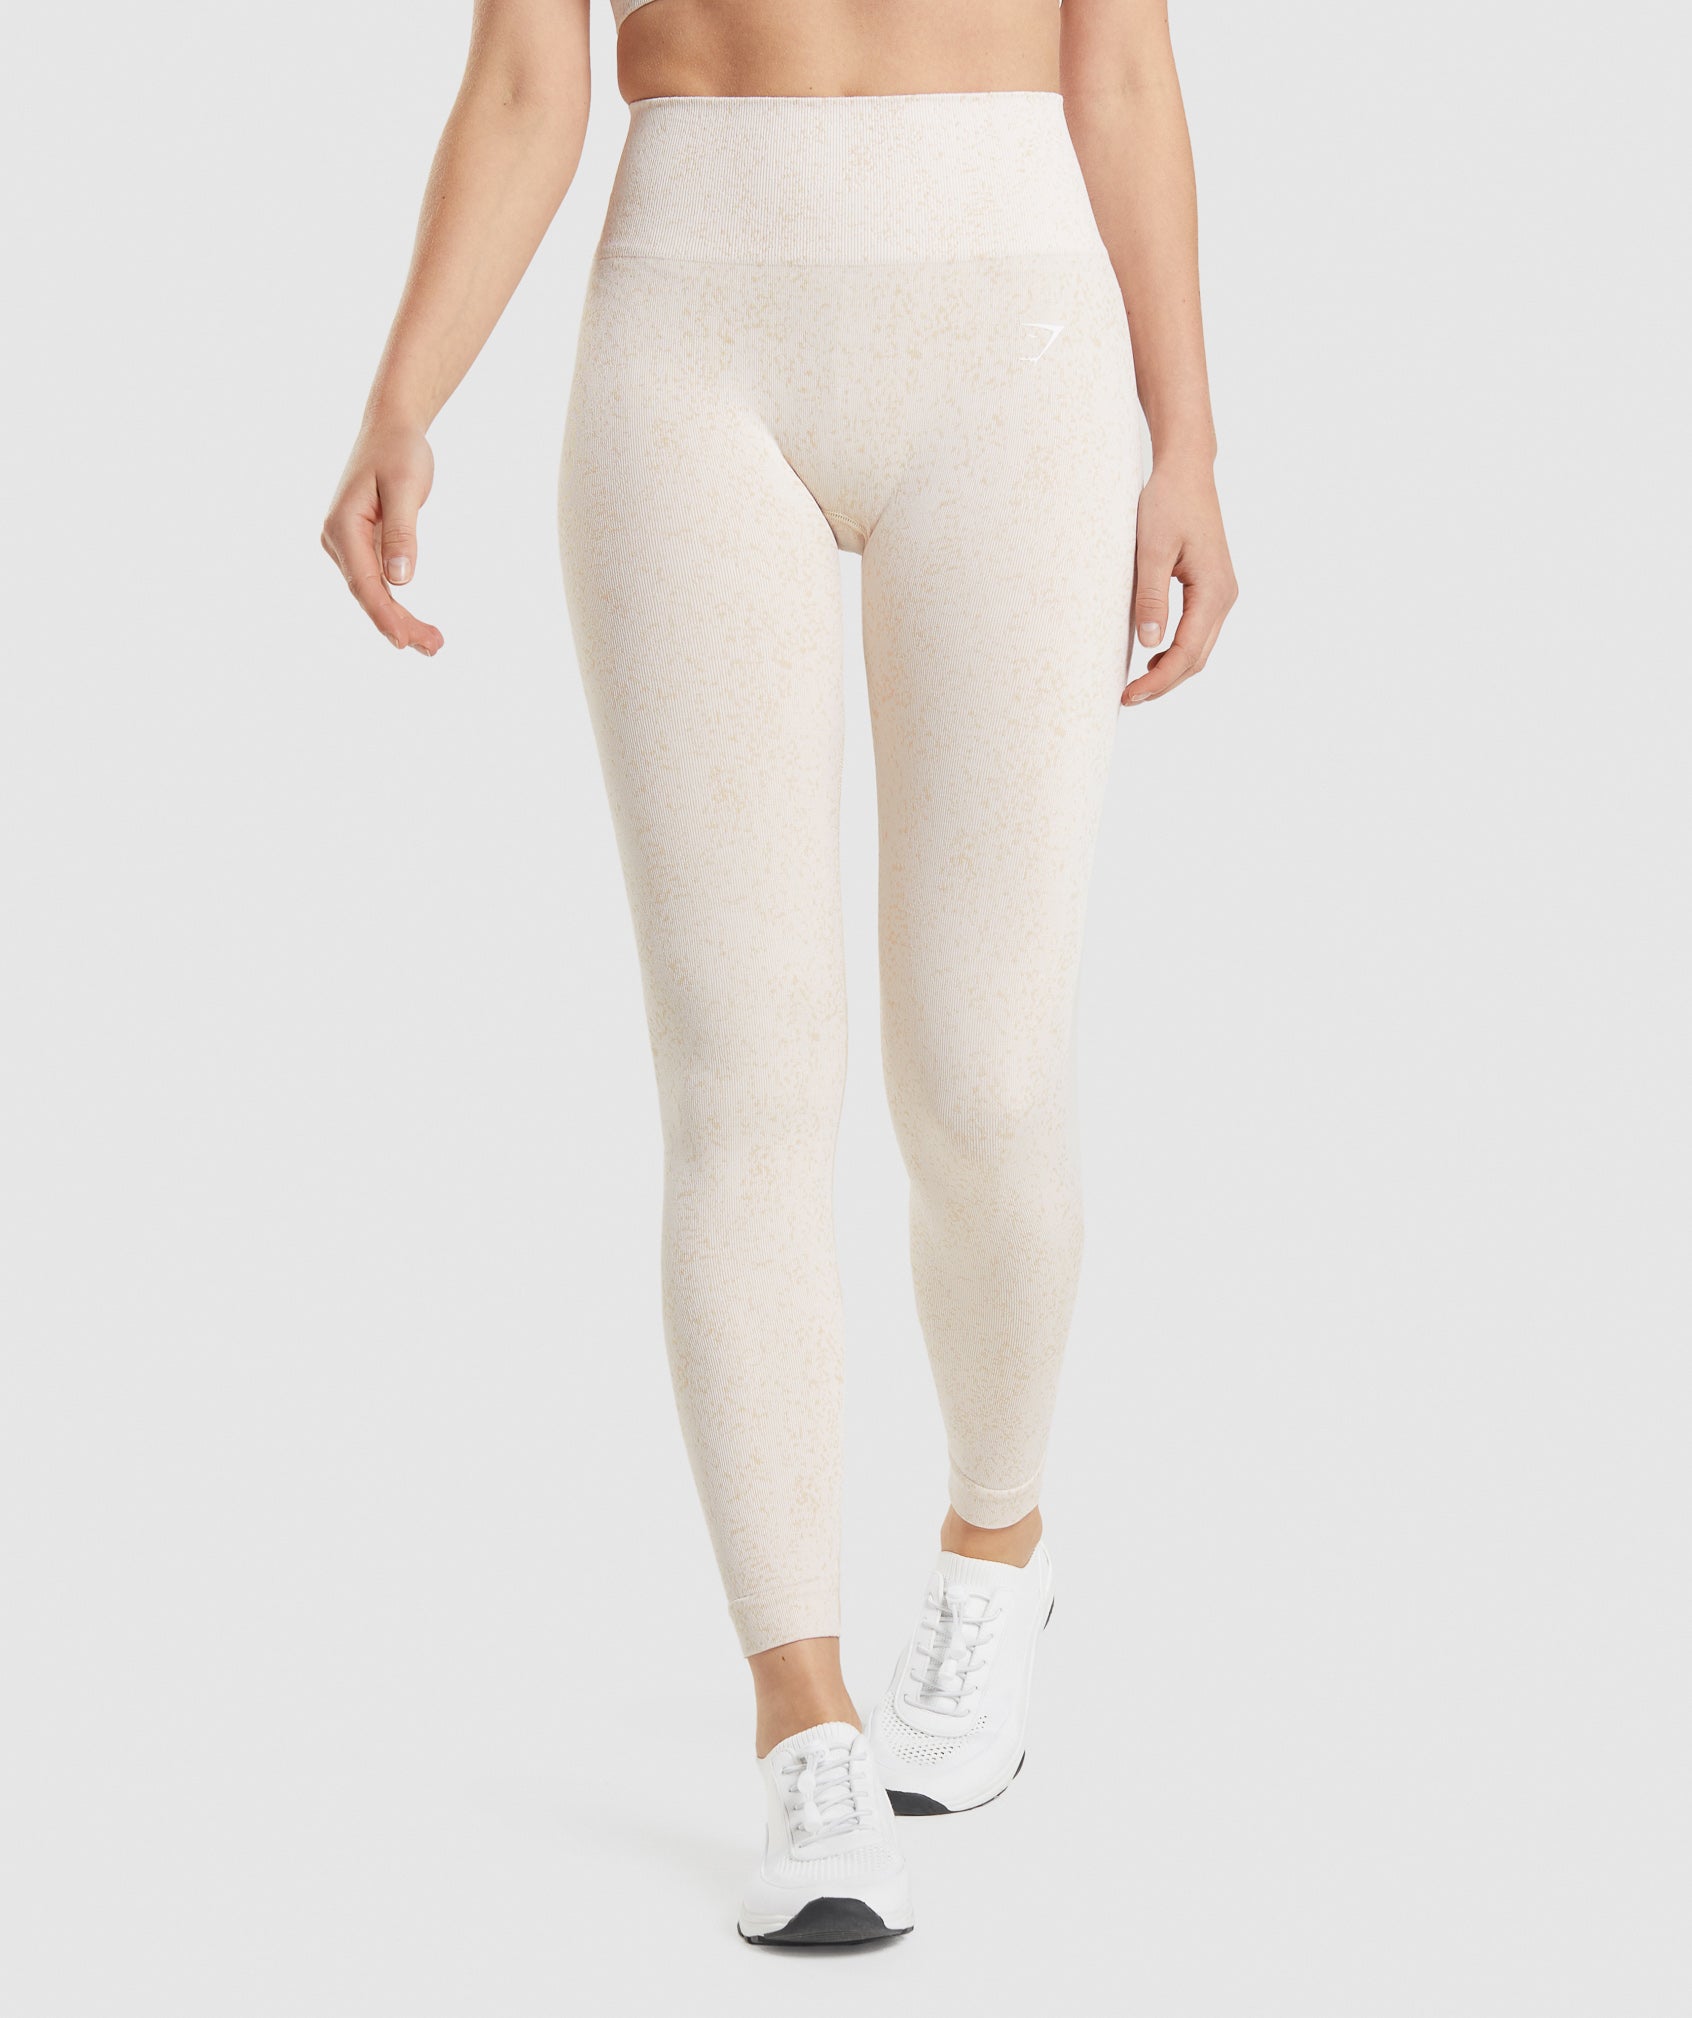 Adapt Fleck Seamless Leggings in Mineral | Coconut White - view 1